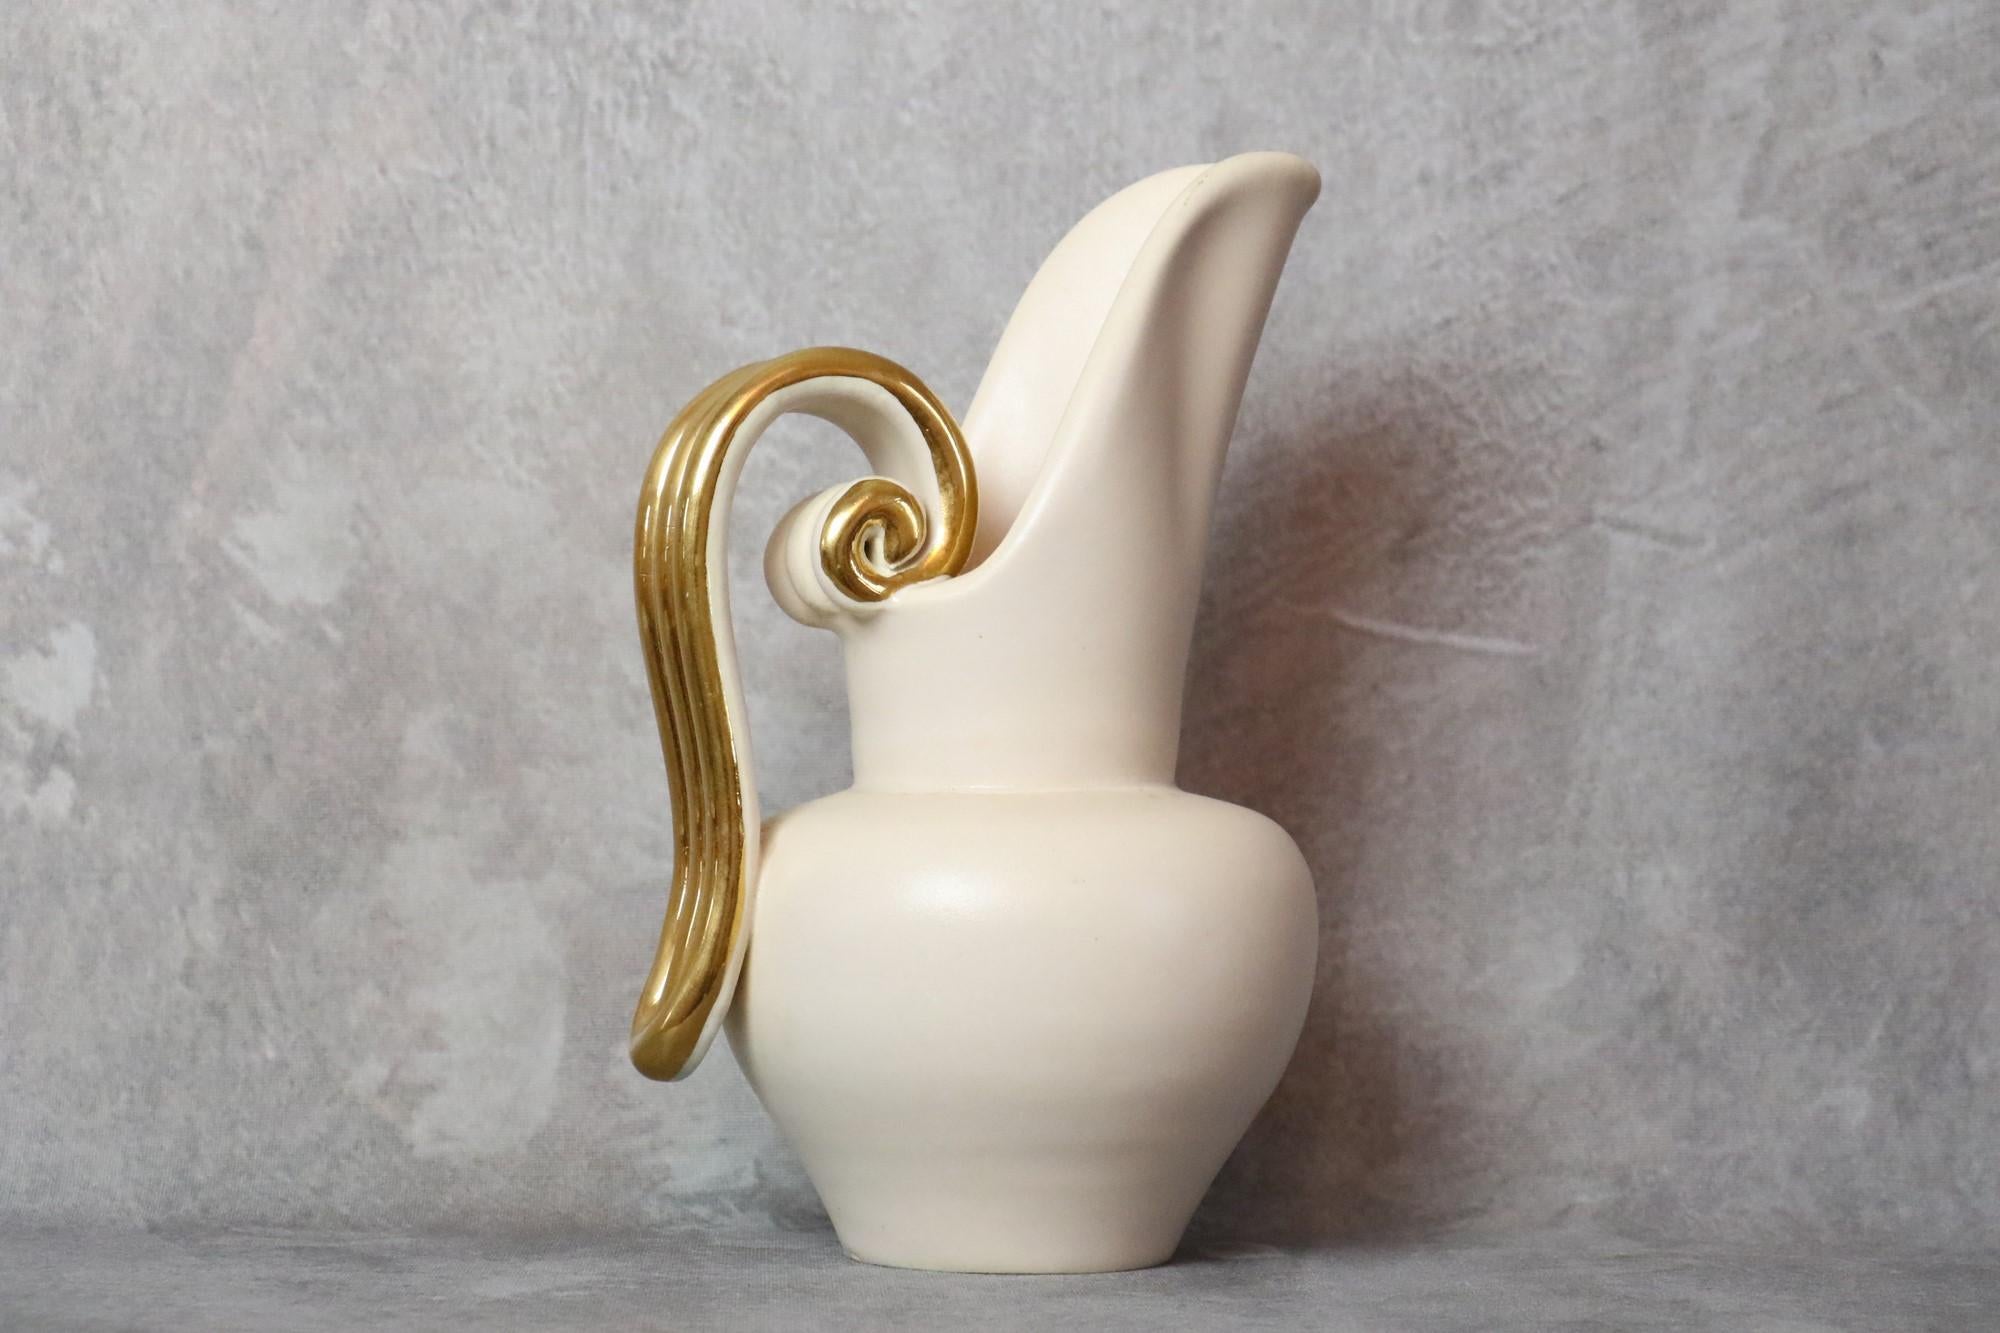 Louis Giraud Mid-century French ceramic white and gold pitcher, Vallauris, 1960s

This is a very beautiful piece, elegant and delicate. The enamel is very soft, there is a nice contrast between the milky white background and the golden